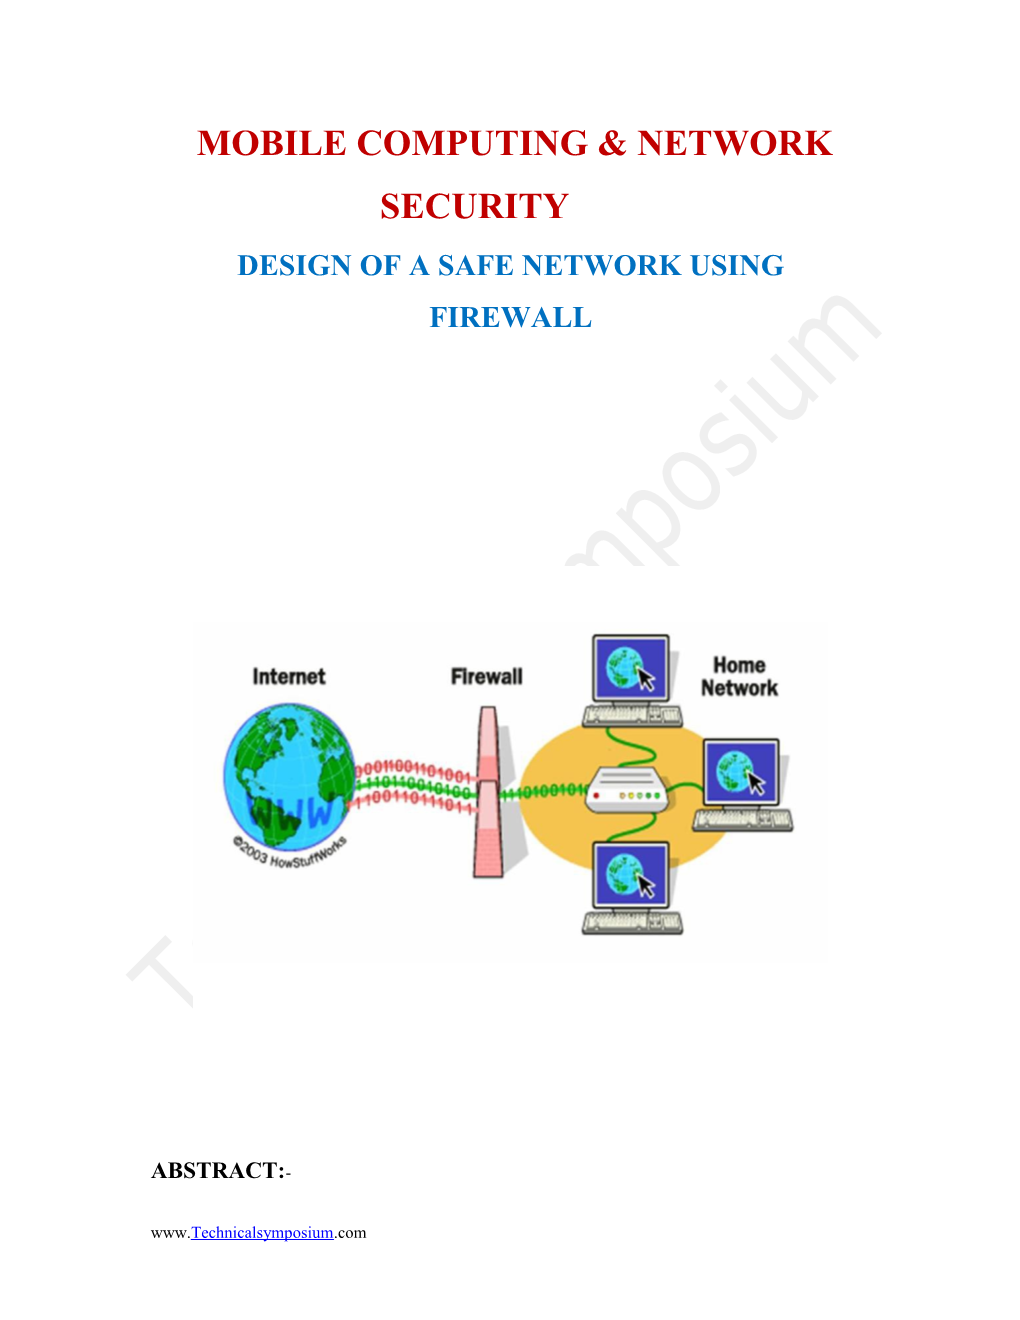 Design of a Safe Network Using